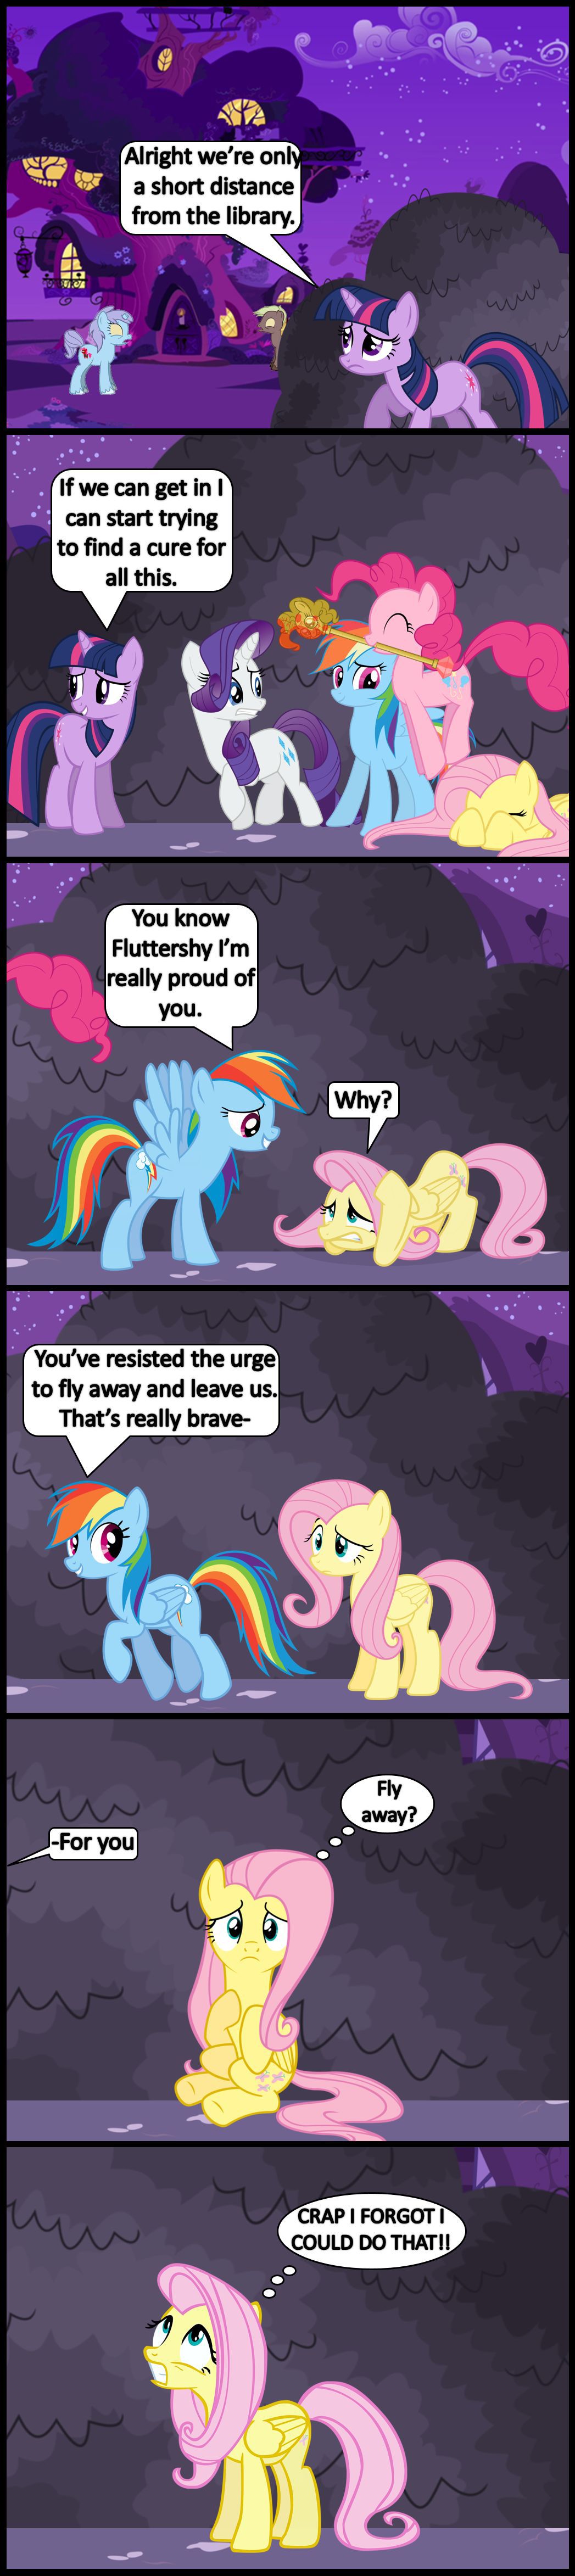 [Bronybyexception] Beating a Dead Pony (My Little Pony: Friendship is Magic) [English] [Ongoing] 20